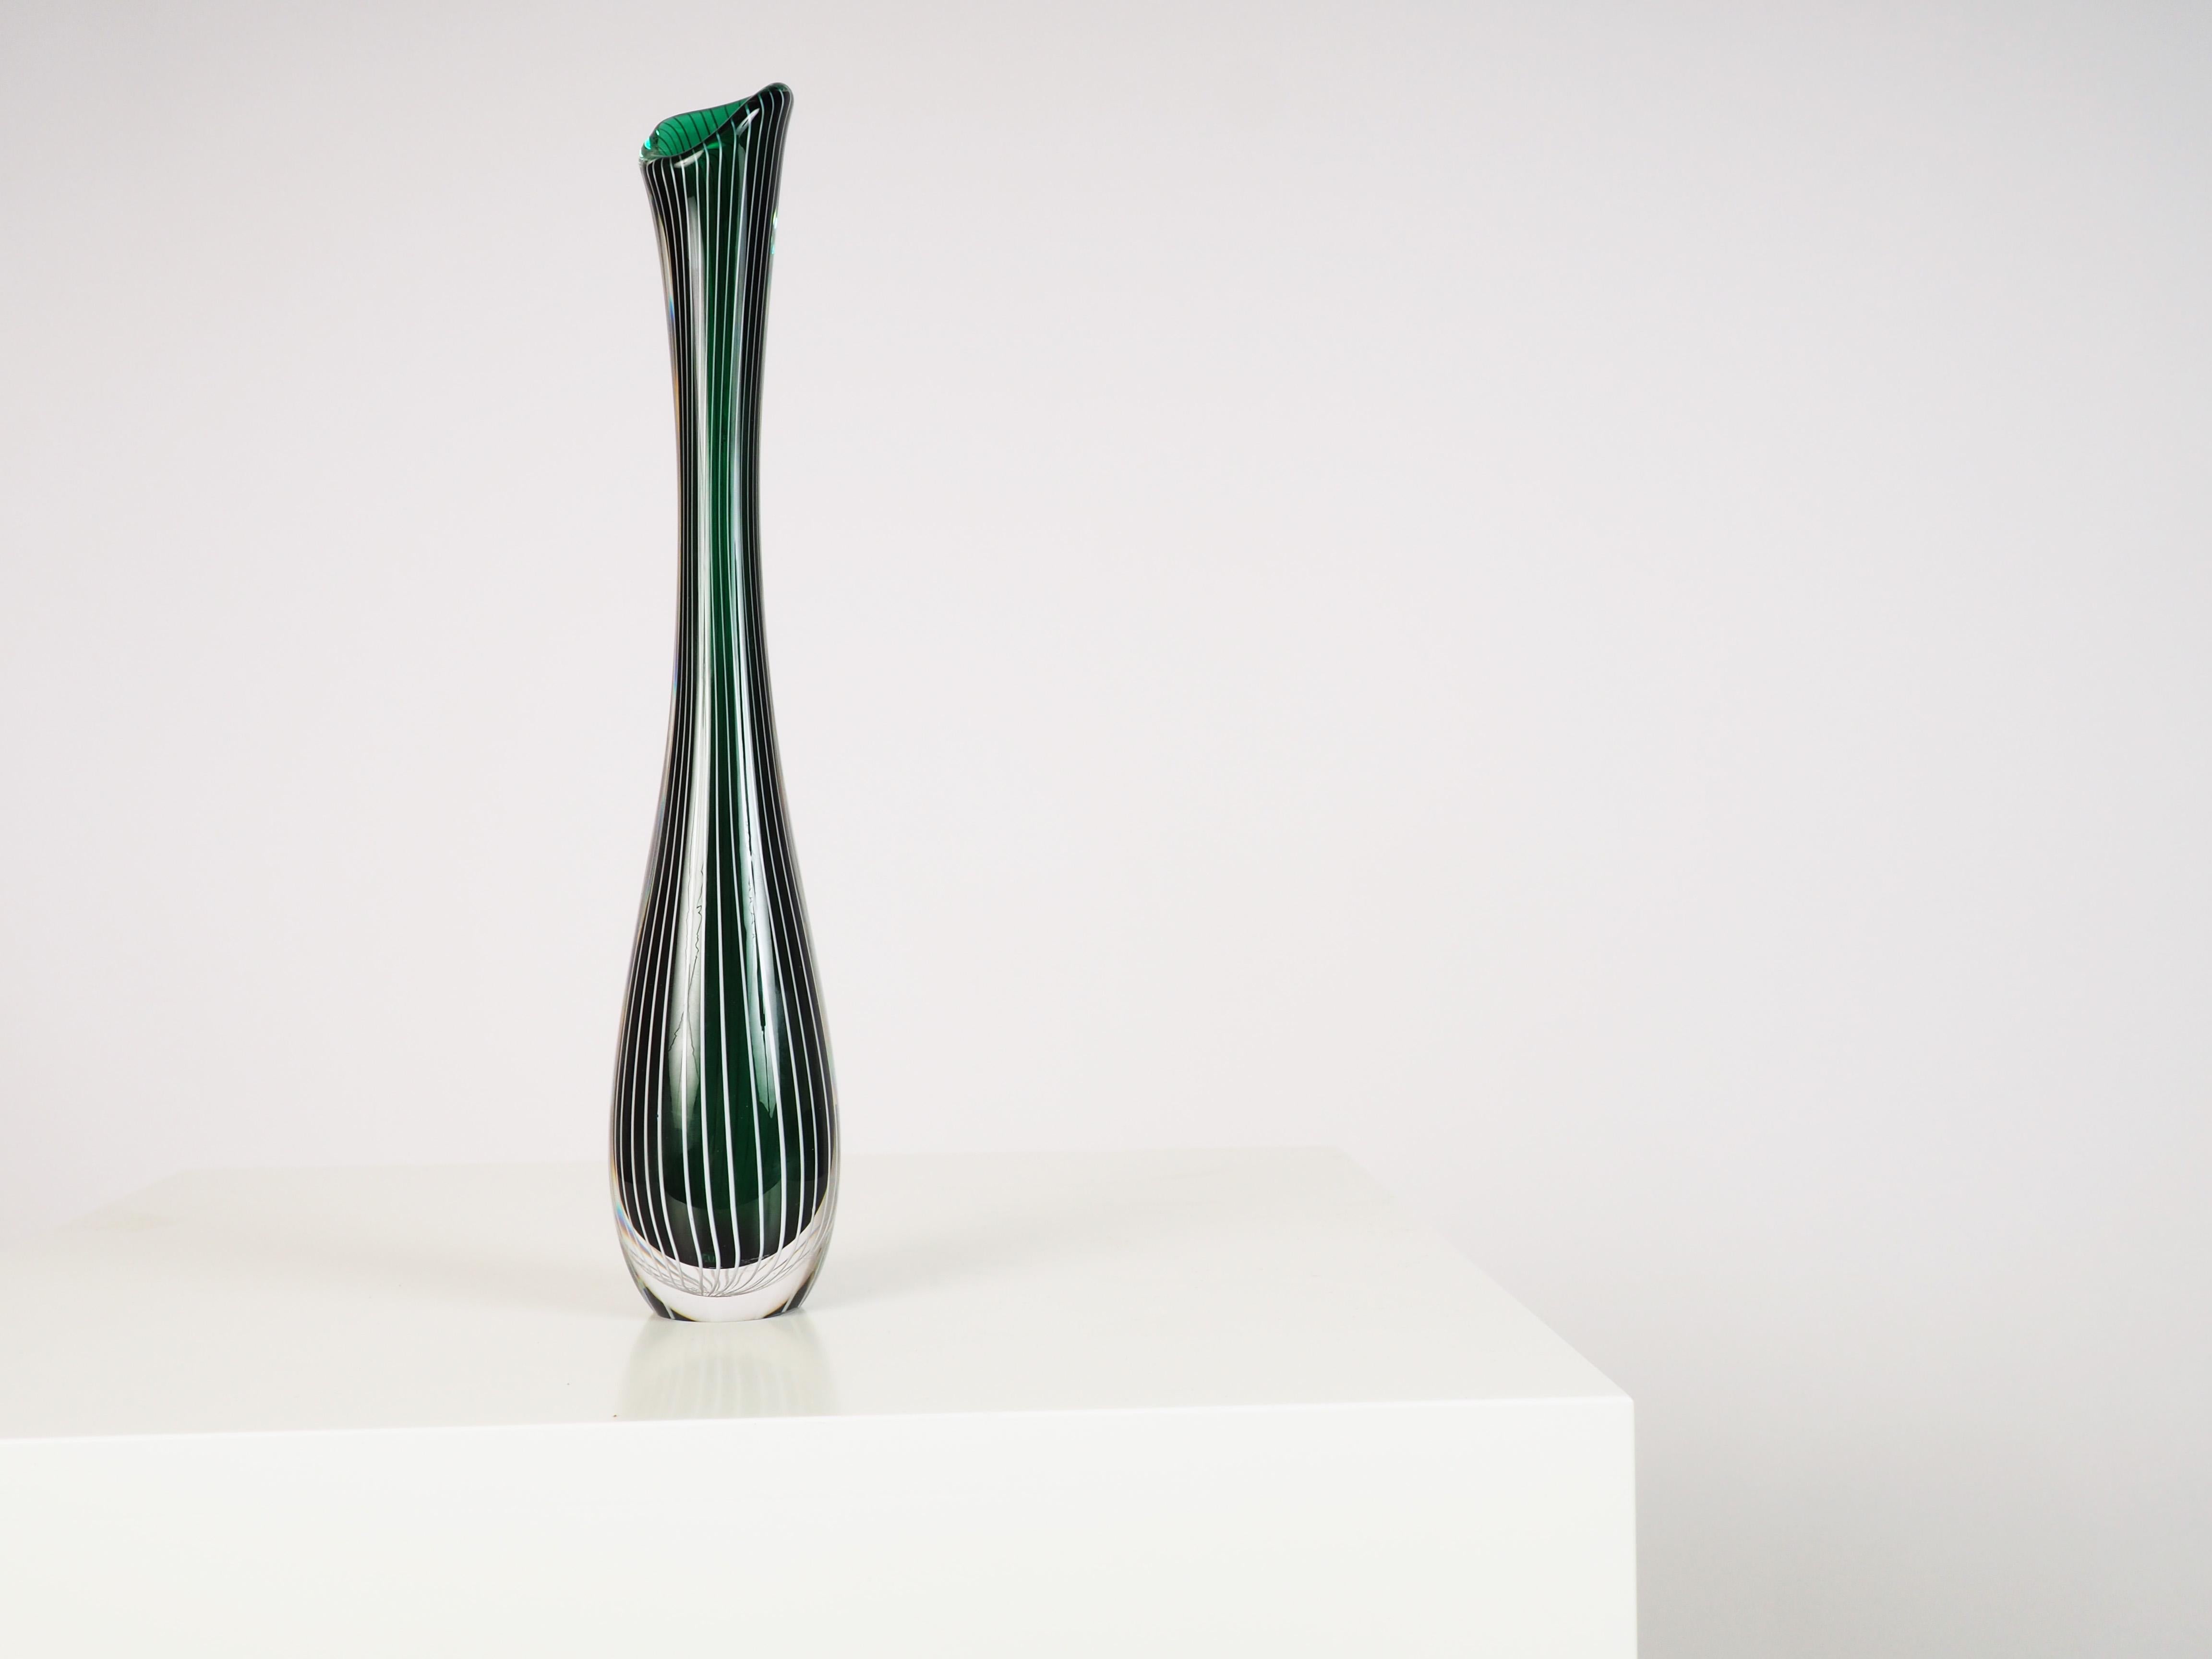 Tall glass vase by the Swedish glass artist Vicke Lindstrand for Kosta Glasbruk. The vase was designed in the 1950s when Vicke Lindstrand returned to his favorite material: handcrafted glass.
The vase is in party green, partly clear glass, with a